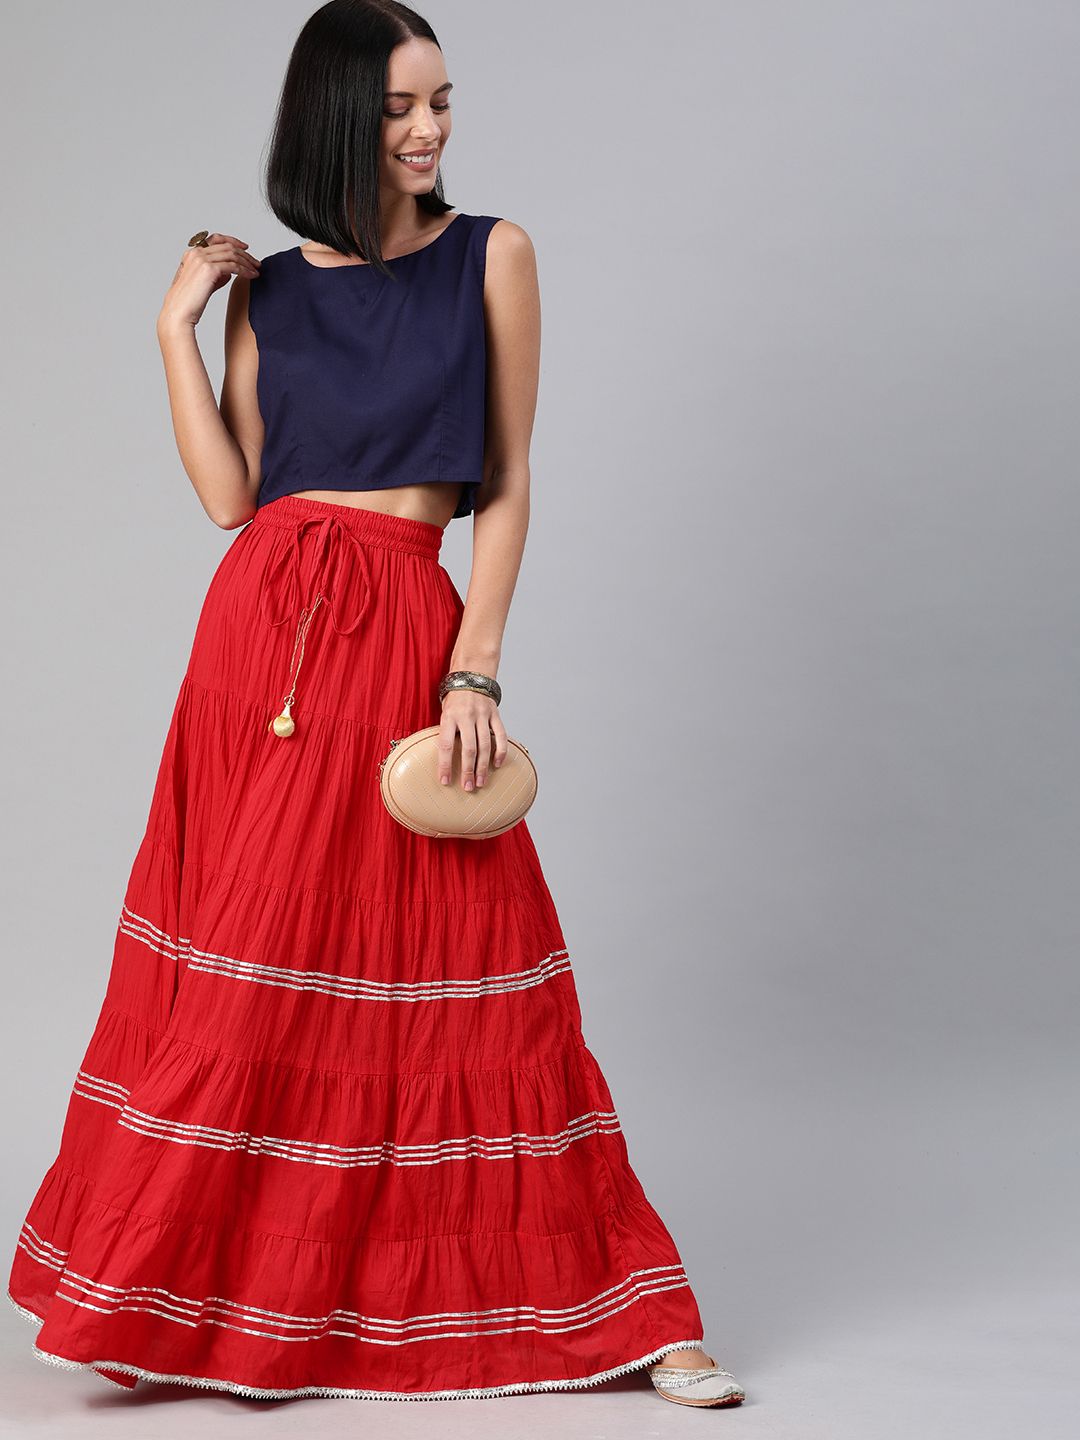 Geroo Jaipur Hand Crafted flared Red Pure Cotton Skirt with Blue Crop Top Price in India